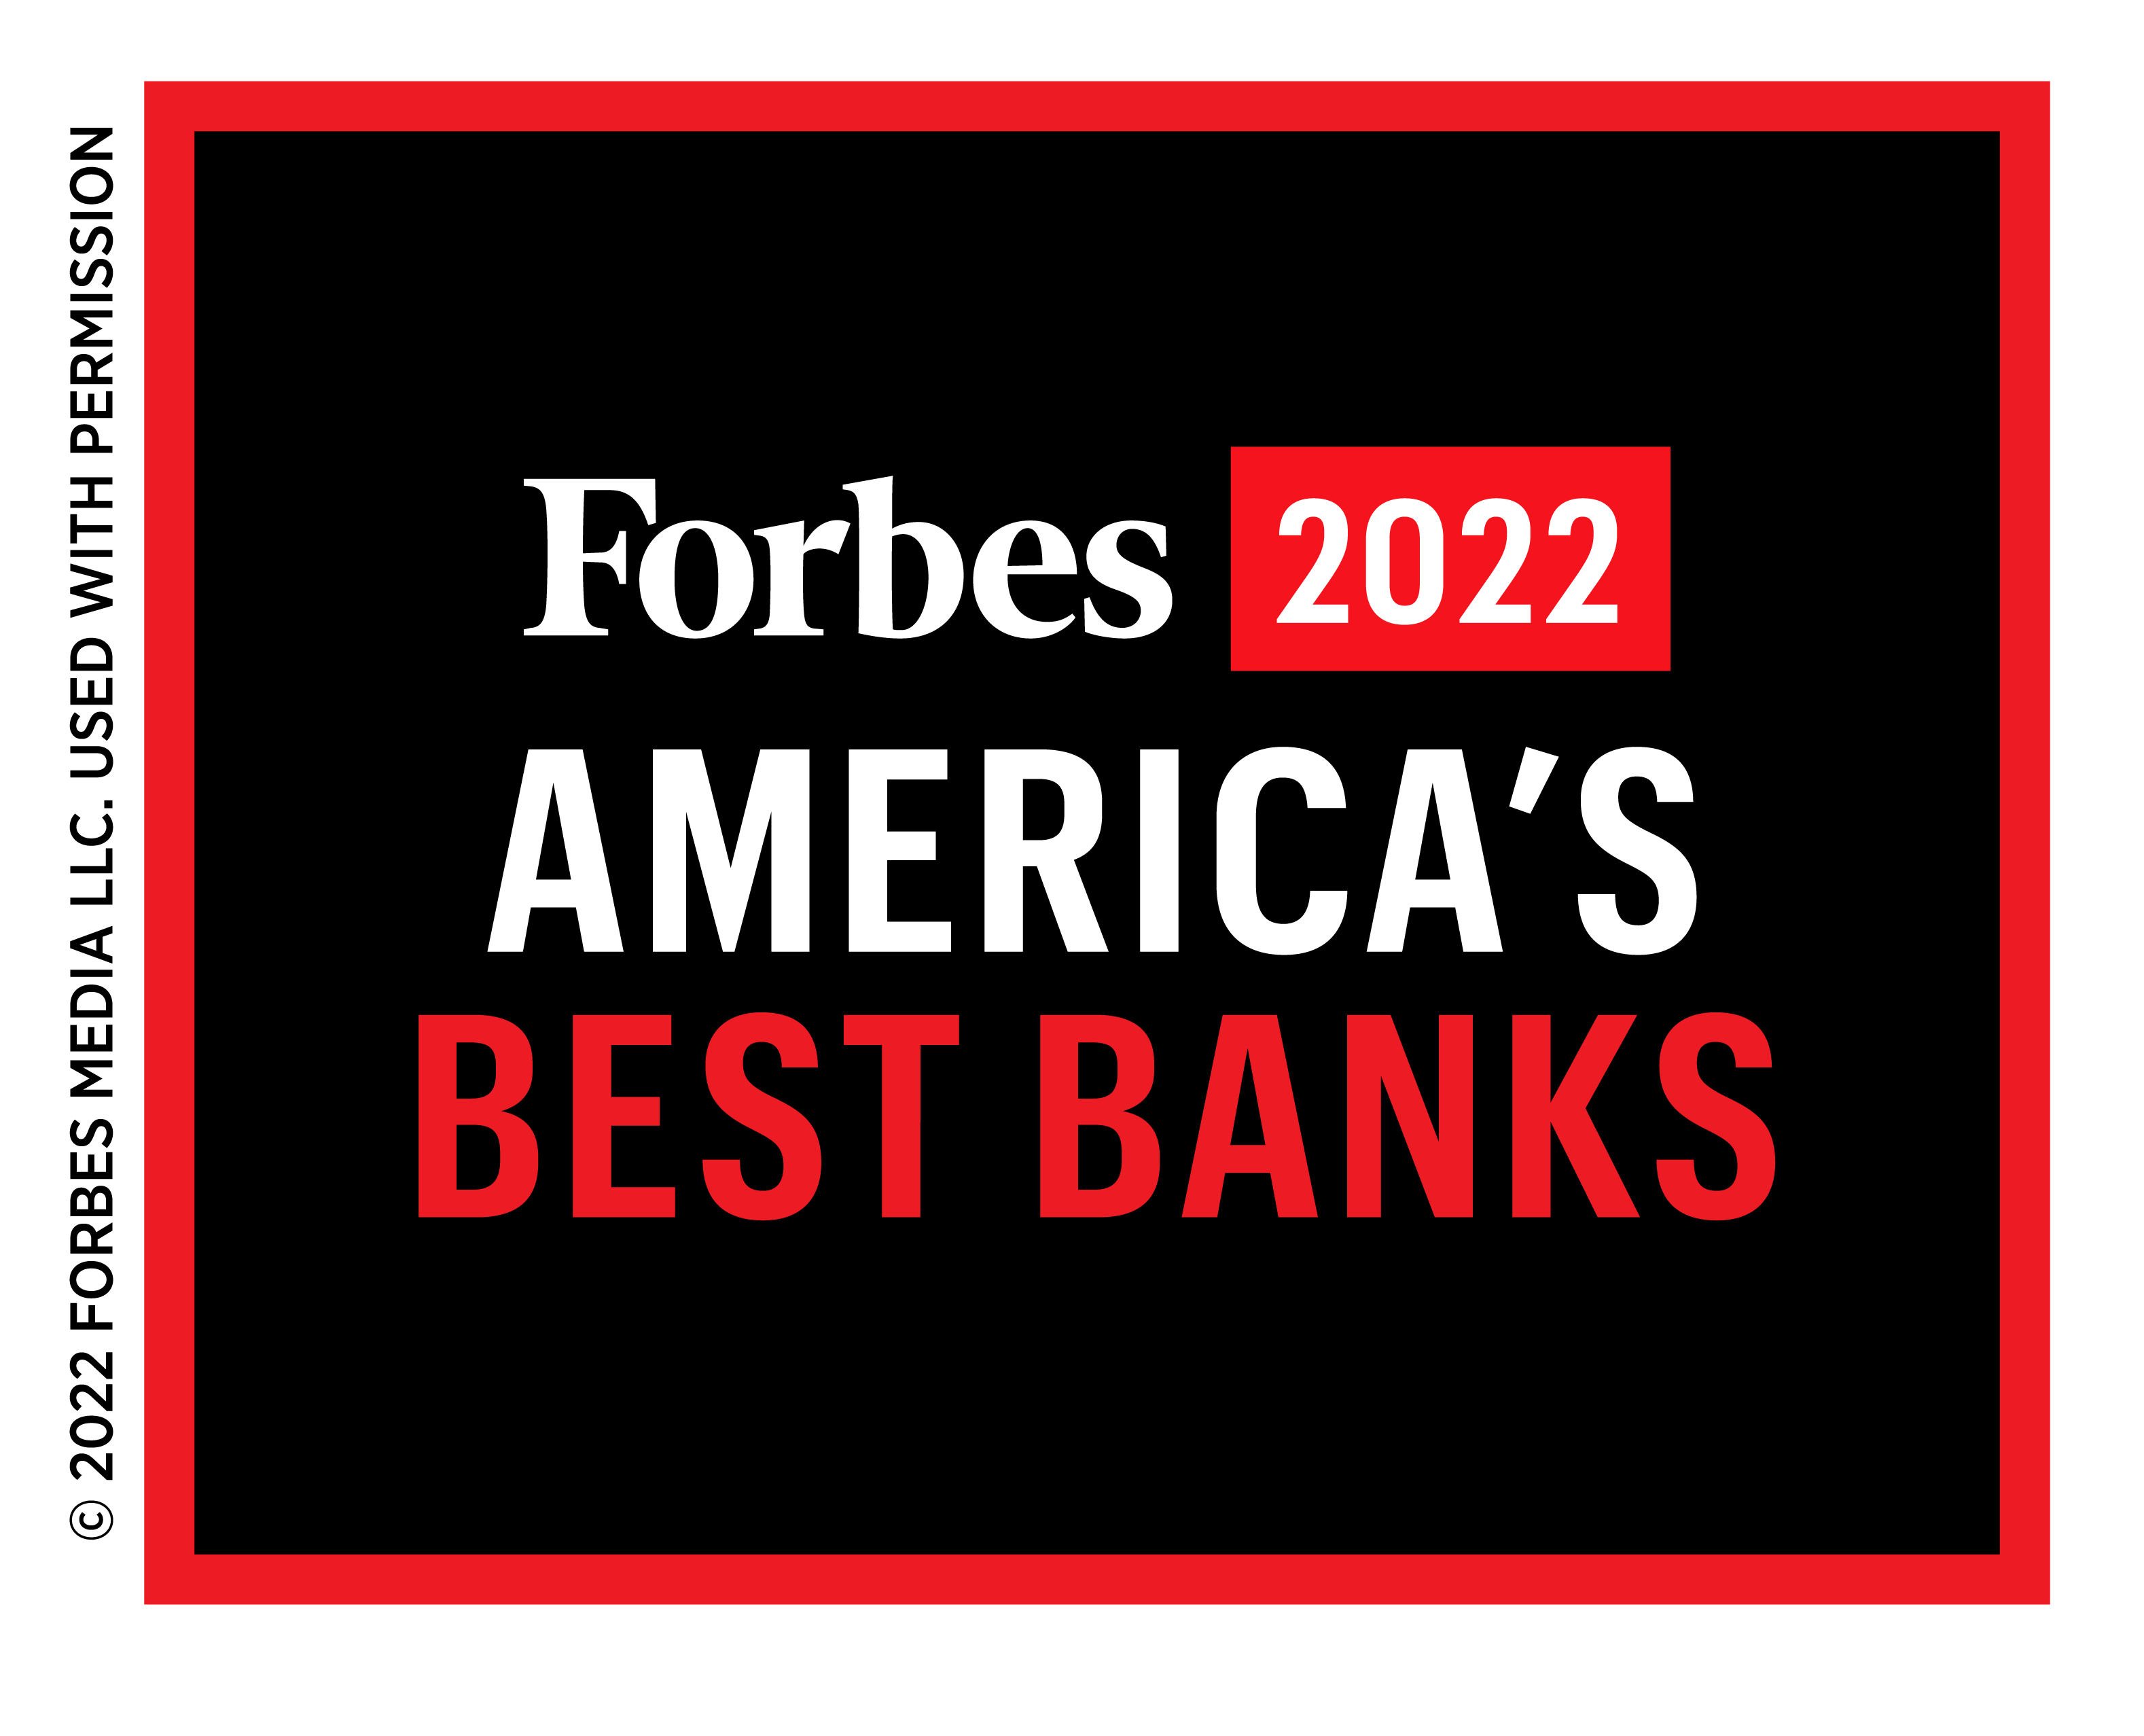 Forbes 2022 America's Best Banks